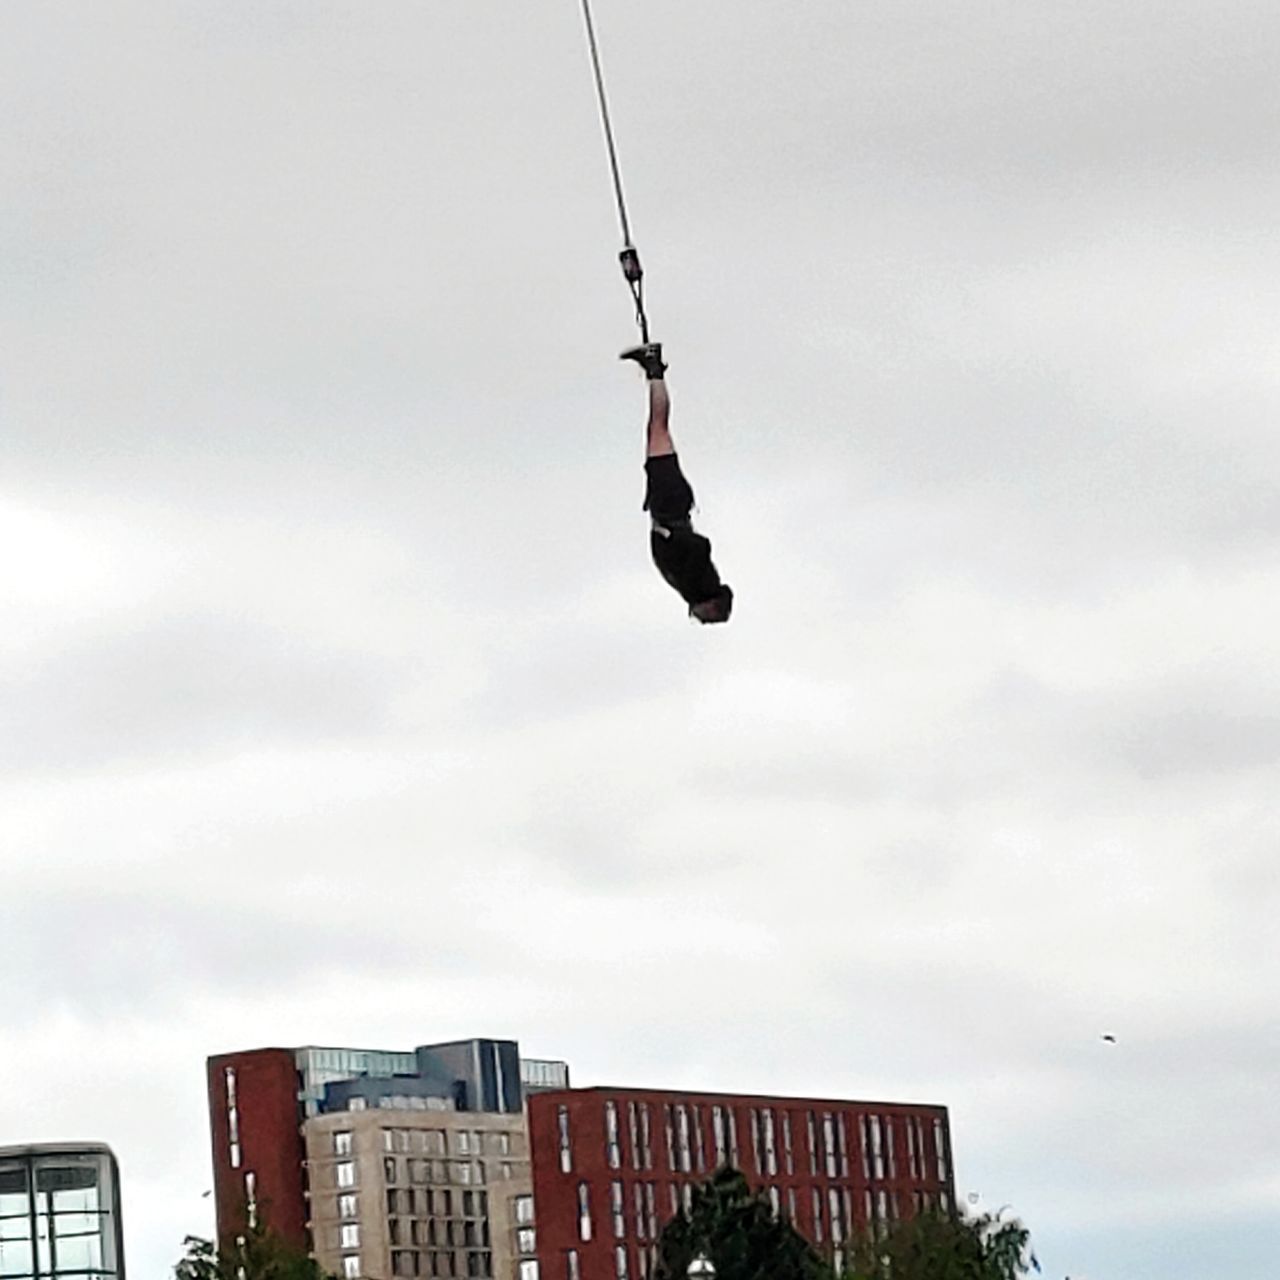 LOW ANGLE VIEW OF MAN FLYING HANGING AGAINST BUILDING